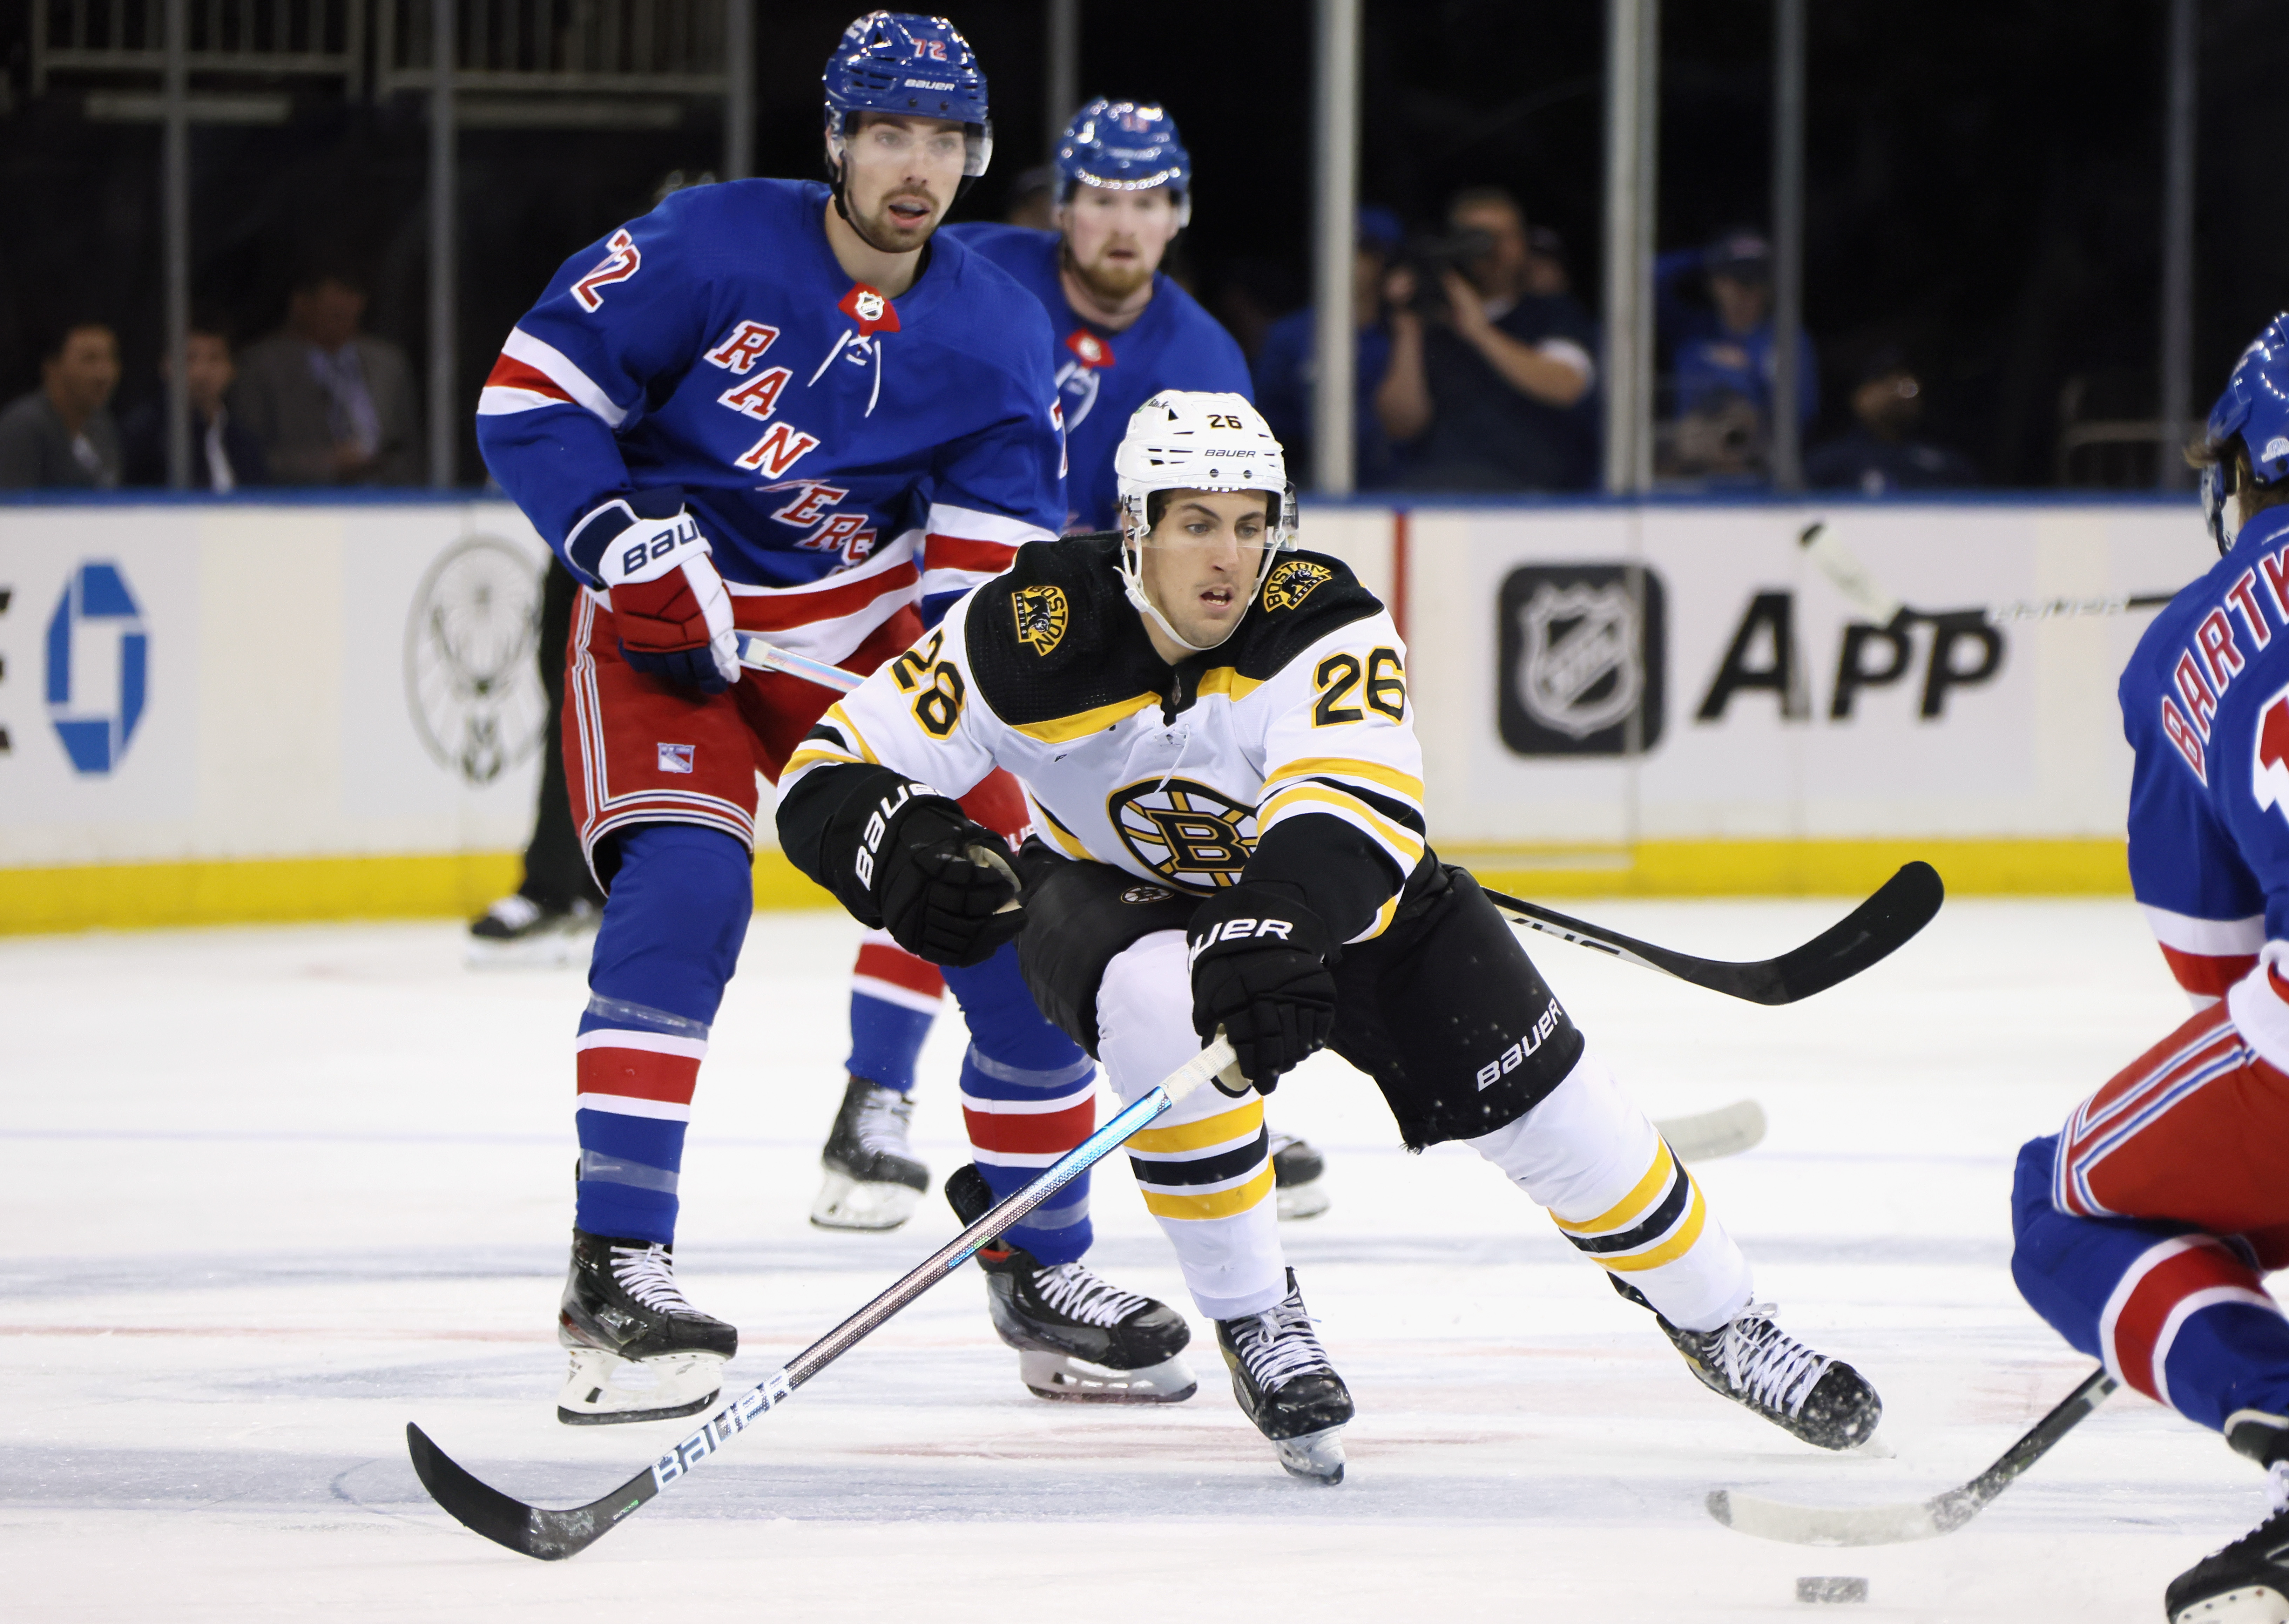 Bruins' roster full of youngsters for first preseason game